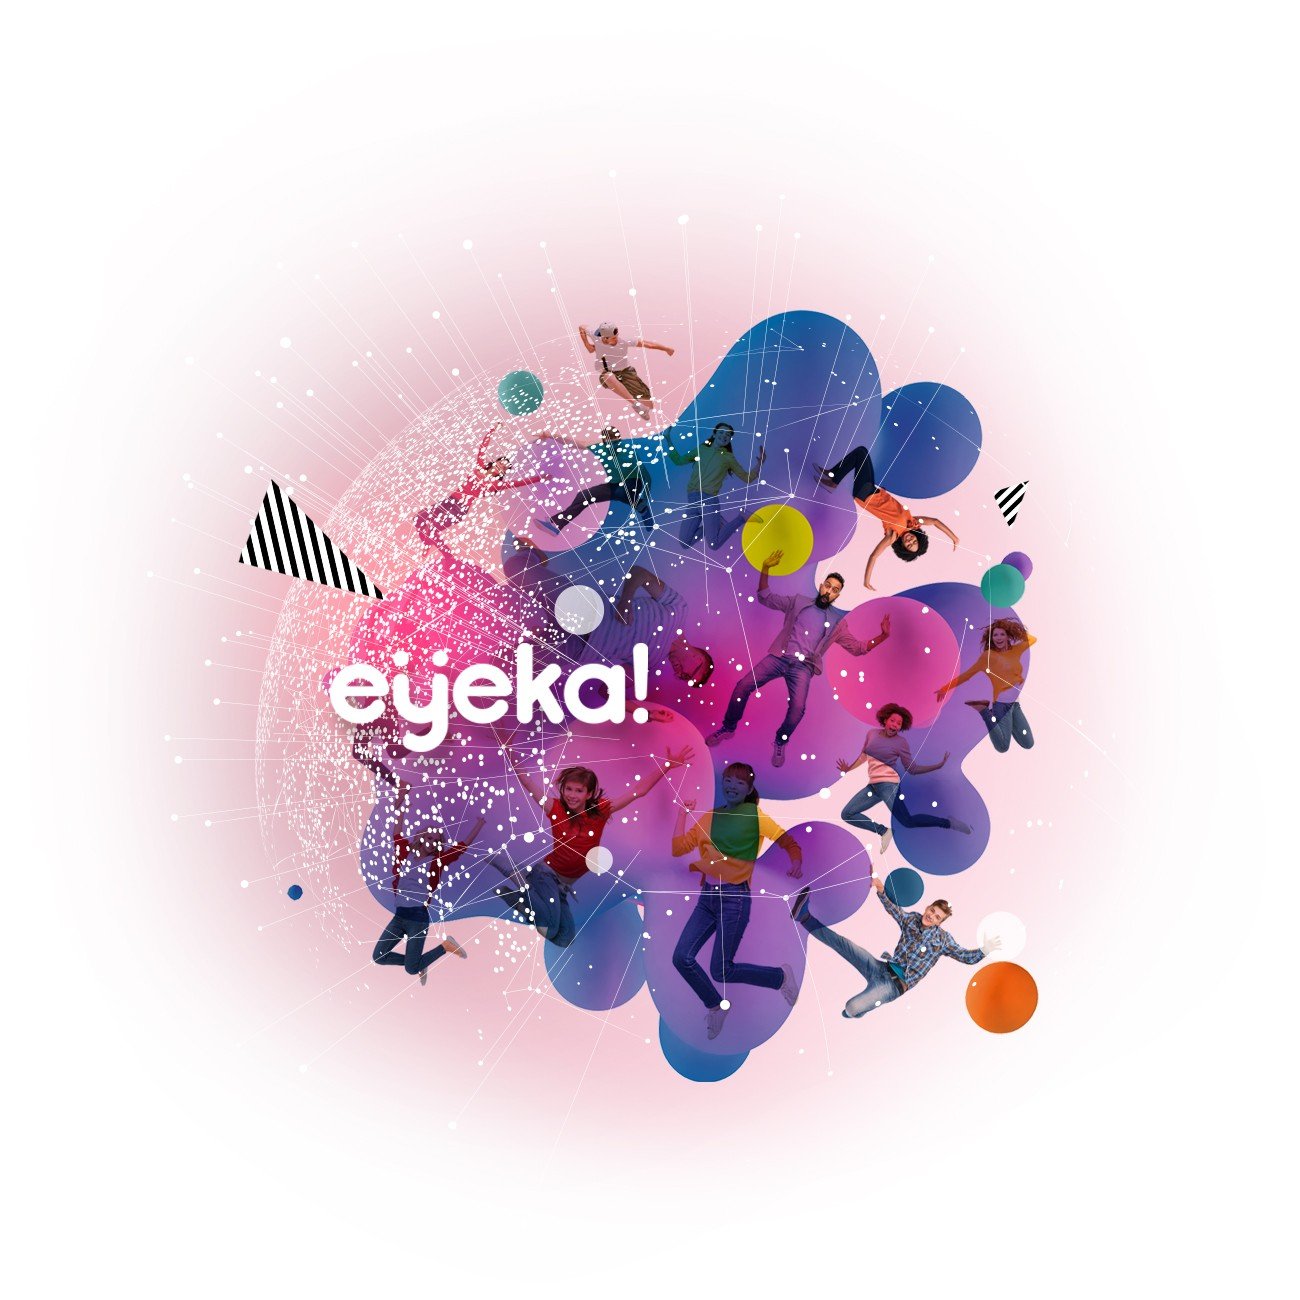 eyeka by InSites Consulting